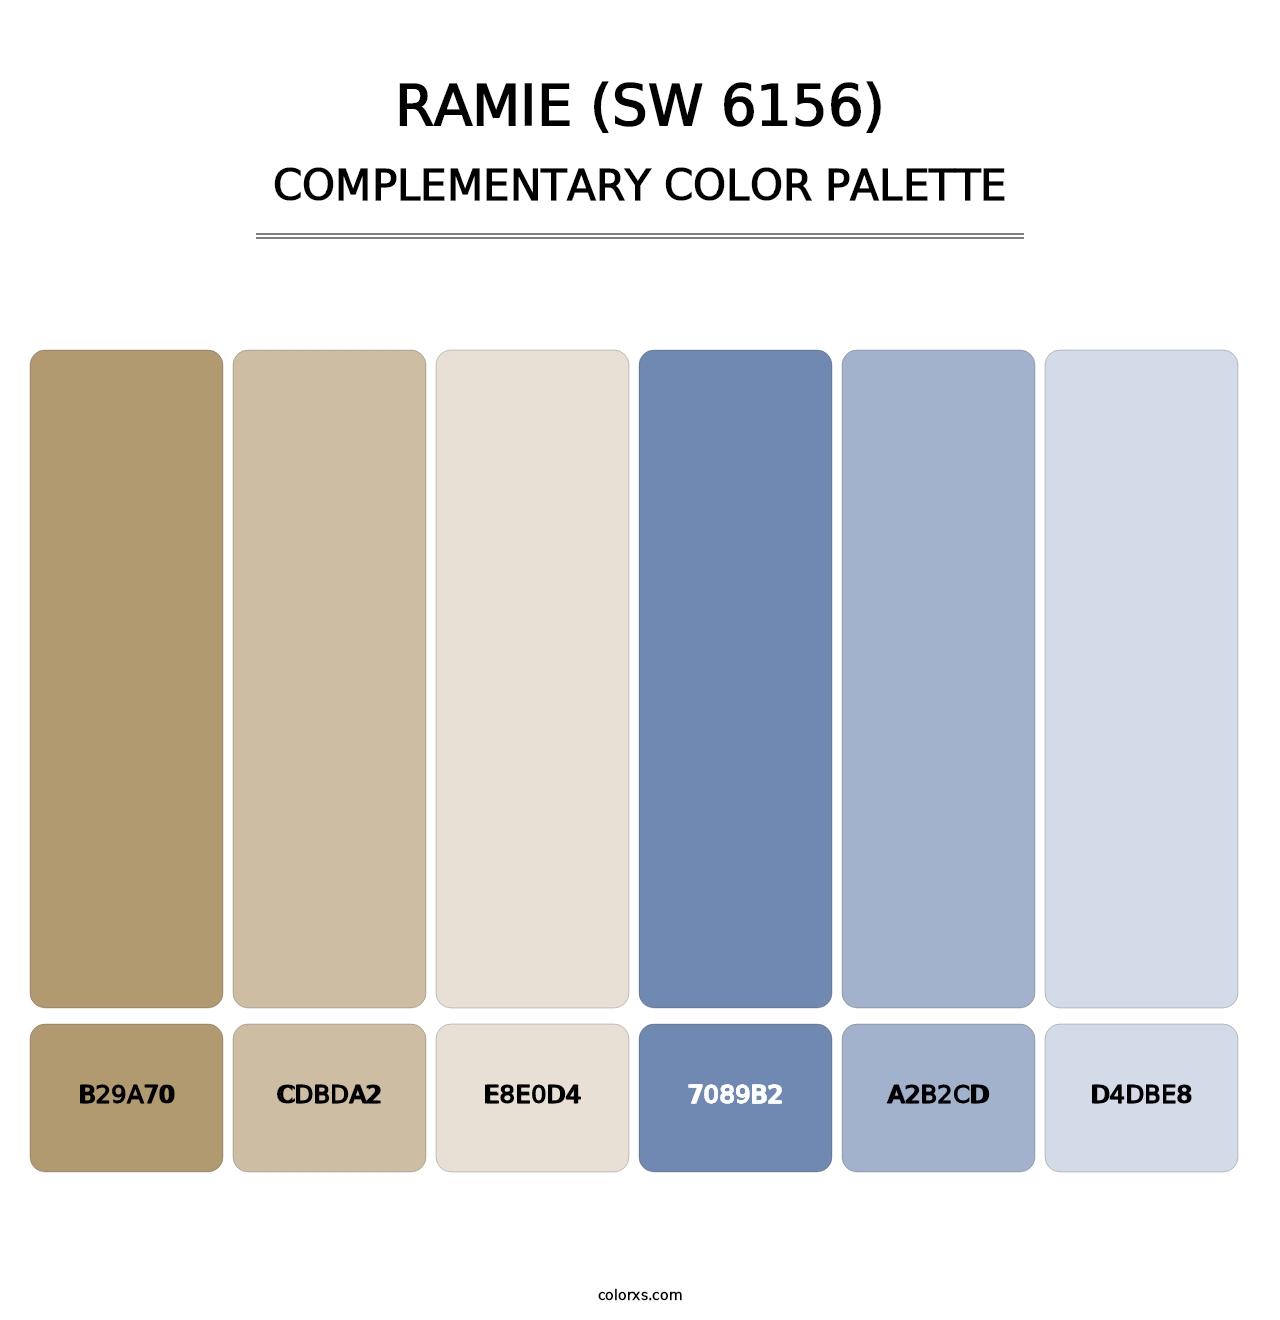 Ramie (SW 6156) - Complementary Color Palette